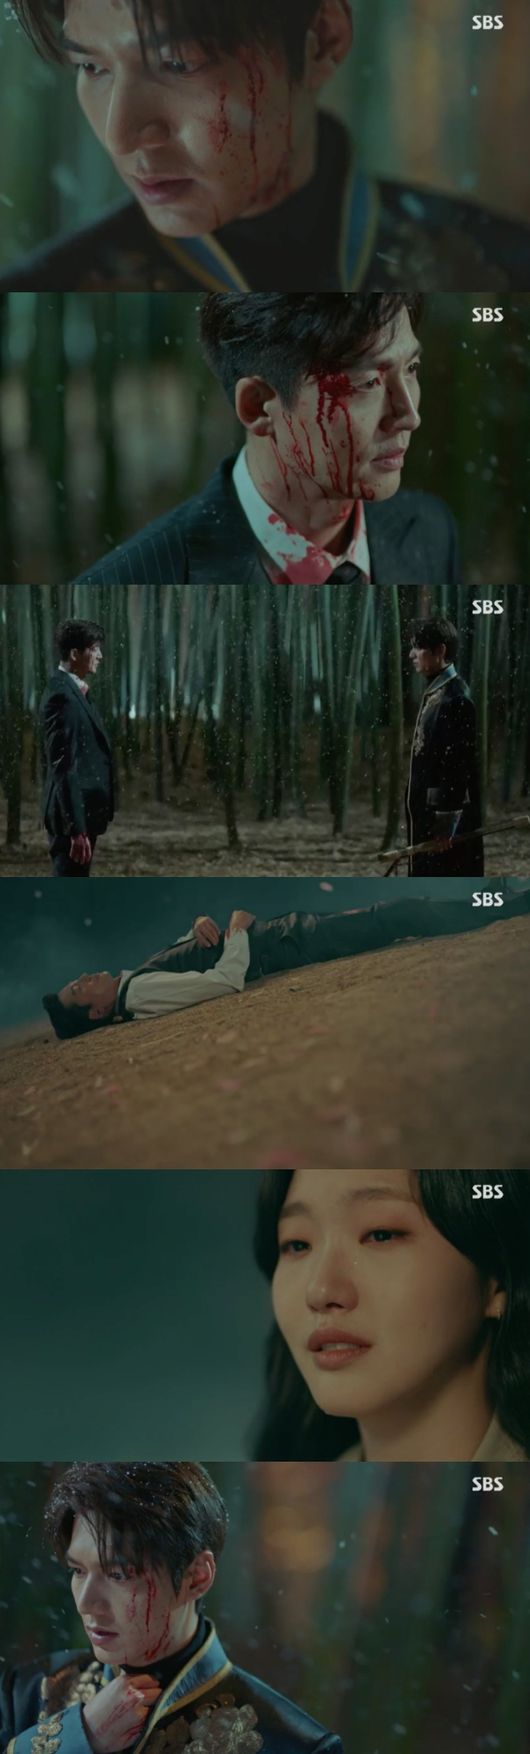 In The King: The Monarch of Eternity, Lee Min-ho brought Lee Jung-jin back to Church and reversed parallel World.In the 16th episode of SBS gilt drama The King: The King (the last episode), which was broadcast on the night of the 12th, the final story of the parallel World romance between Korean Empire Emperor Lee Gon (Lee Min-ho) and Korean criminal Jung Tae-eul (Kim Go-eun) was drawn.On the day of The King, Korean Empires 1994 reverse night, Lee Gon, along with the guard captain Cho Young (Woo Do-hwan), infiltrated to catch the Reversal Irim.Even if Im wrong, Young has to use you to use Reversal Irim, Igon ordered.But Cho said, Im sorry, Your Majesty, I have to use my lord. He said he would prioritize keeping the enemy rather than catching the Reversal.Lee said, I am not alone tonight, but I was confused by the fate that started to change from the past by chasing the contrast that ran ahead of me.At that time, Reversals night young Igon pulled a knife against Irim in the past, and at that moment the glass on the ceiling broke, and Irim missed the full-scale out of his hand and Igon appeared with the contrast.However, in the chaotic gap, Irim again held the man-pa-sik in his hand, and at that moment the man-pa-sik sculpture in the hands of Igon and Jeong Tae-eul turned into ashes.Irim ran to the forest with a full-scale effigy, where he found a dimension door leading to parallel World and said, I was right, I was right.This is the door to another world. At that moment, Igon appears and knifes Irim.Irim did not know the long-faced Igon and asked, Who are you chasing me? And Igon said, I am the emperor of Korean Empire, the owner of the sword, and the person who will enforce the punishment given to you.Lee said, The sky is down, the earth is helping the spirit, and the sun and the moon are shaped and the mountain is formed in the shape of the mountain stream. He said, I am the master of the manga-style.At that moment, Jung Tae-eul succeeded in shooting and eliminating Irim in a gap of dimension. He cried and said, You have succeeded. Then I can not come back.SBS is provided.